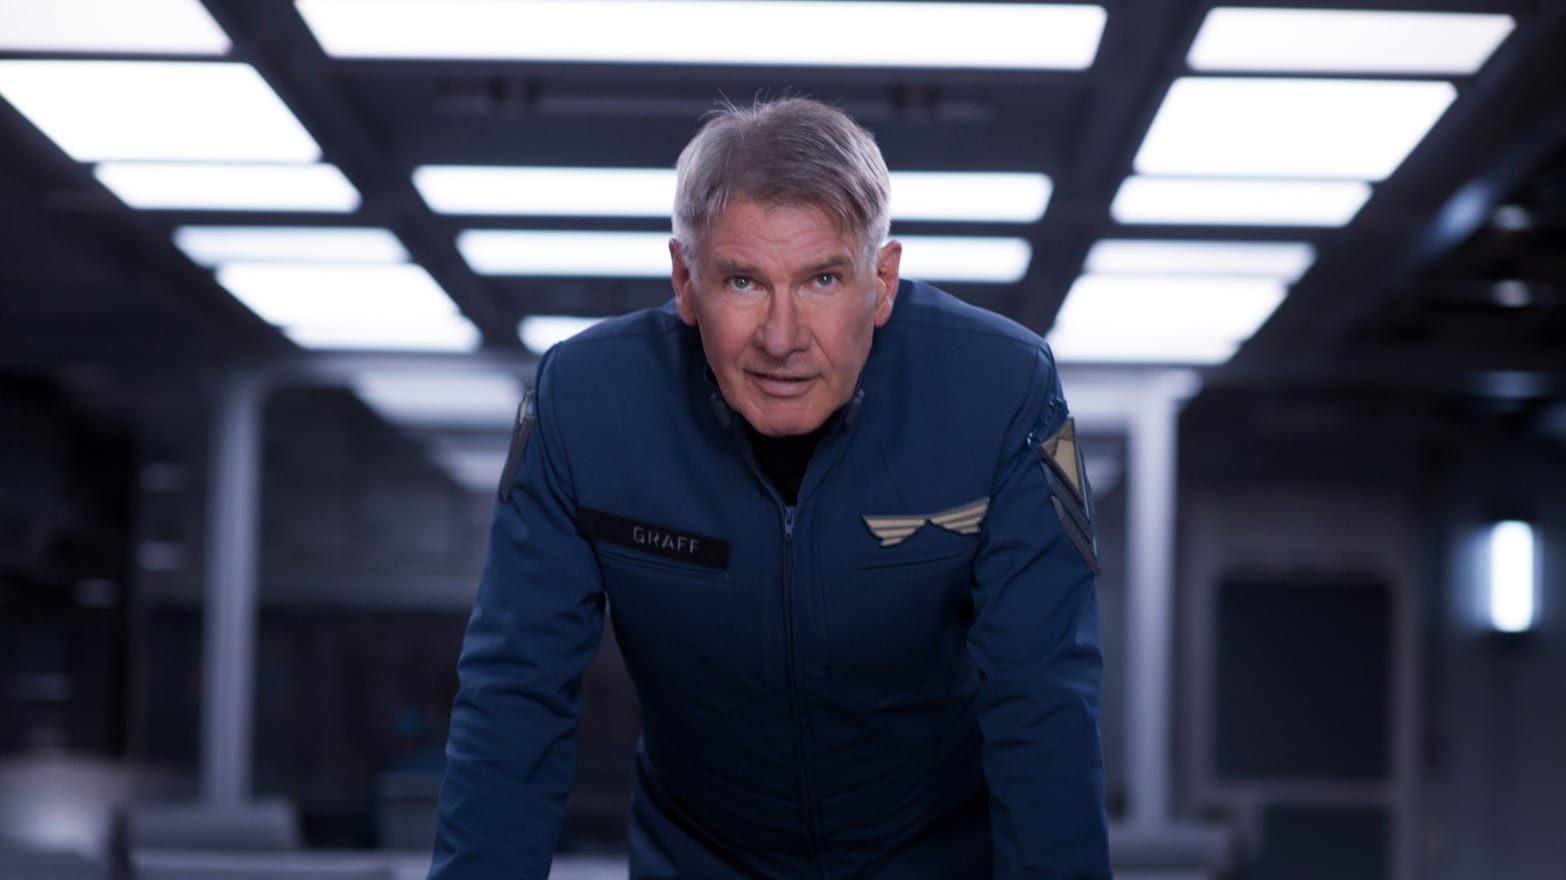 Harrison Ford in Ender's Game (2013)